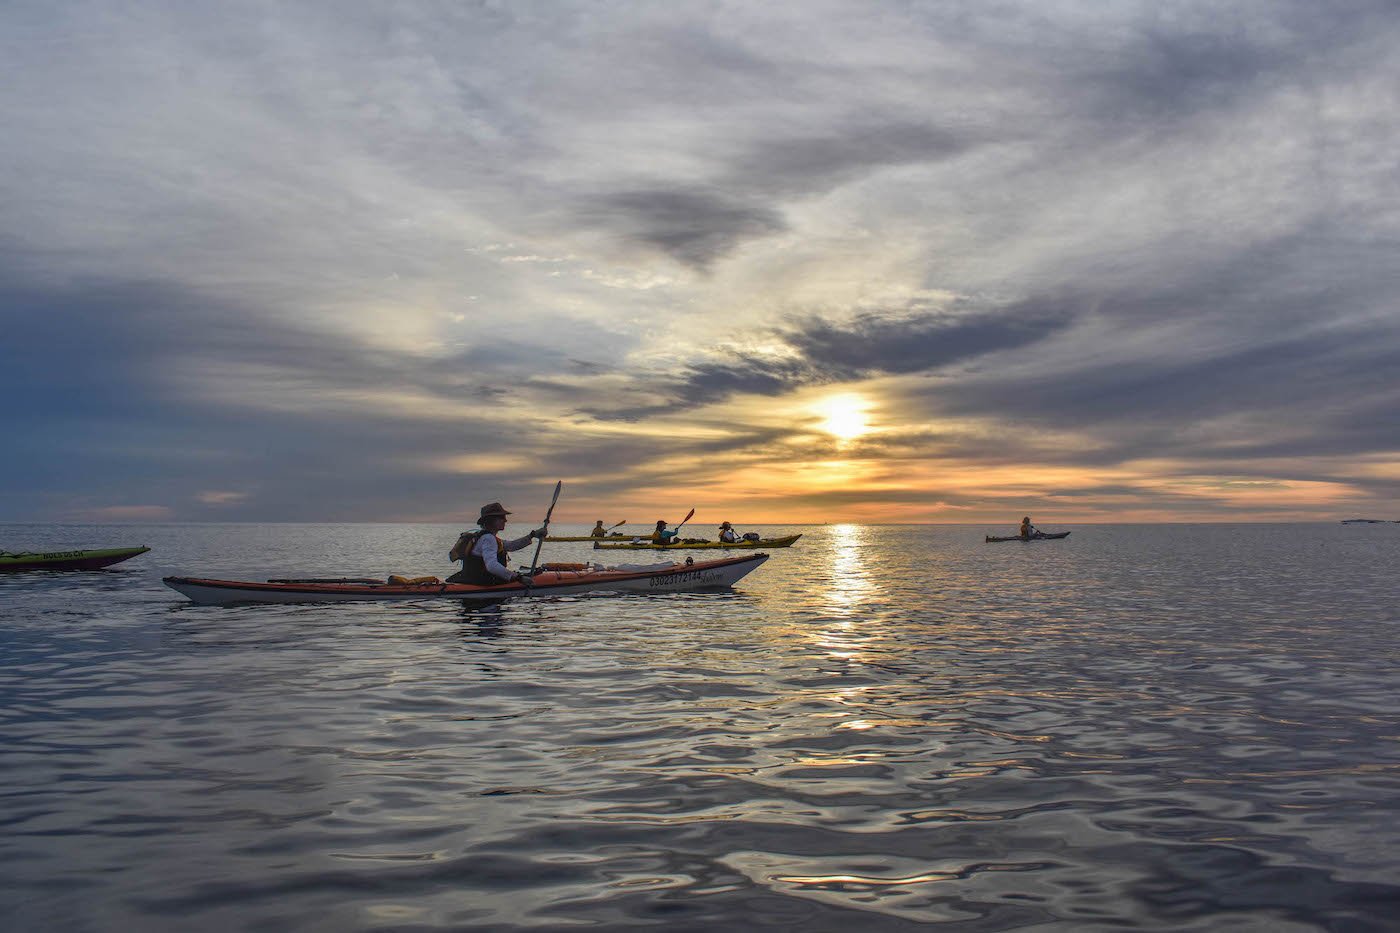 NOLS students paddle kayaks on silvery calm water with sun peeking through dark clouds